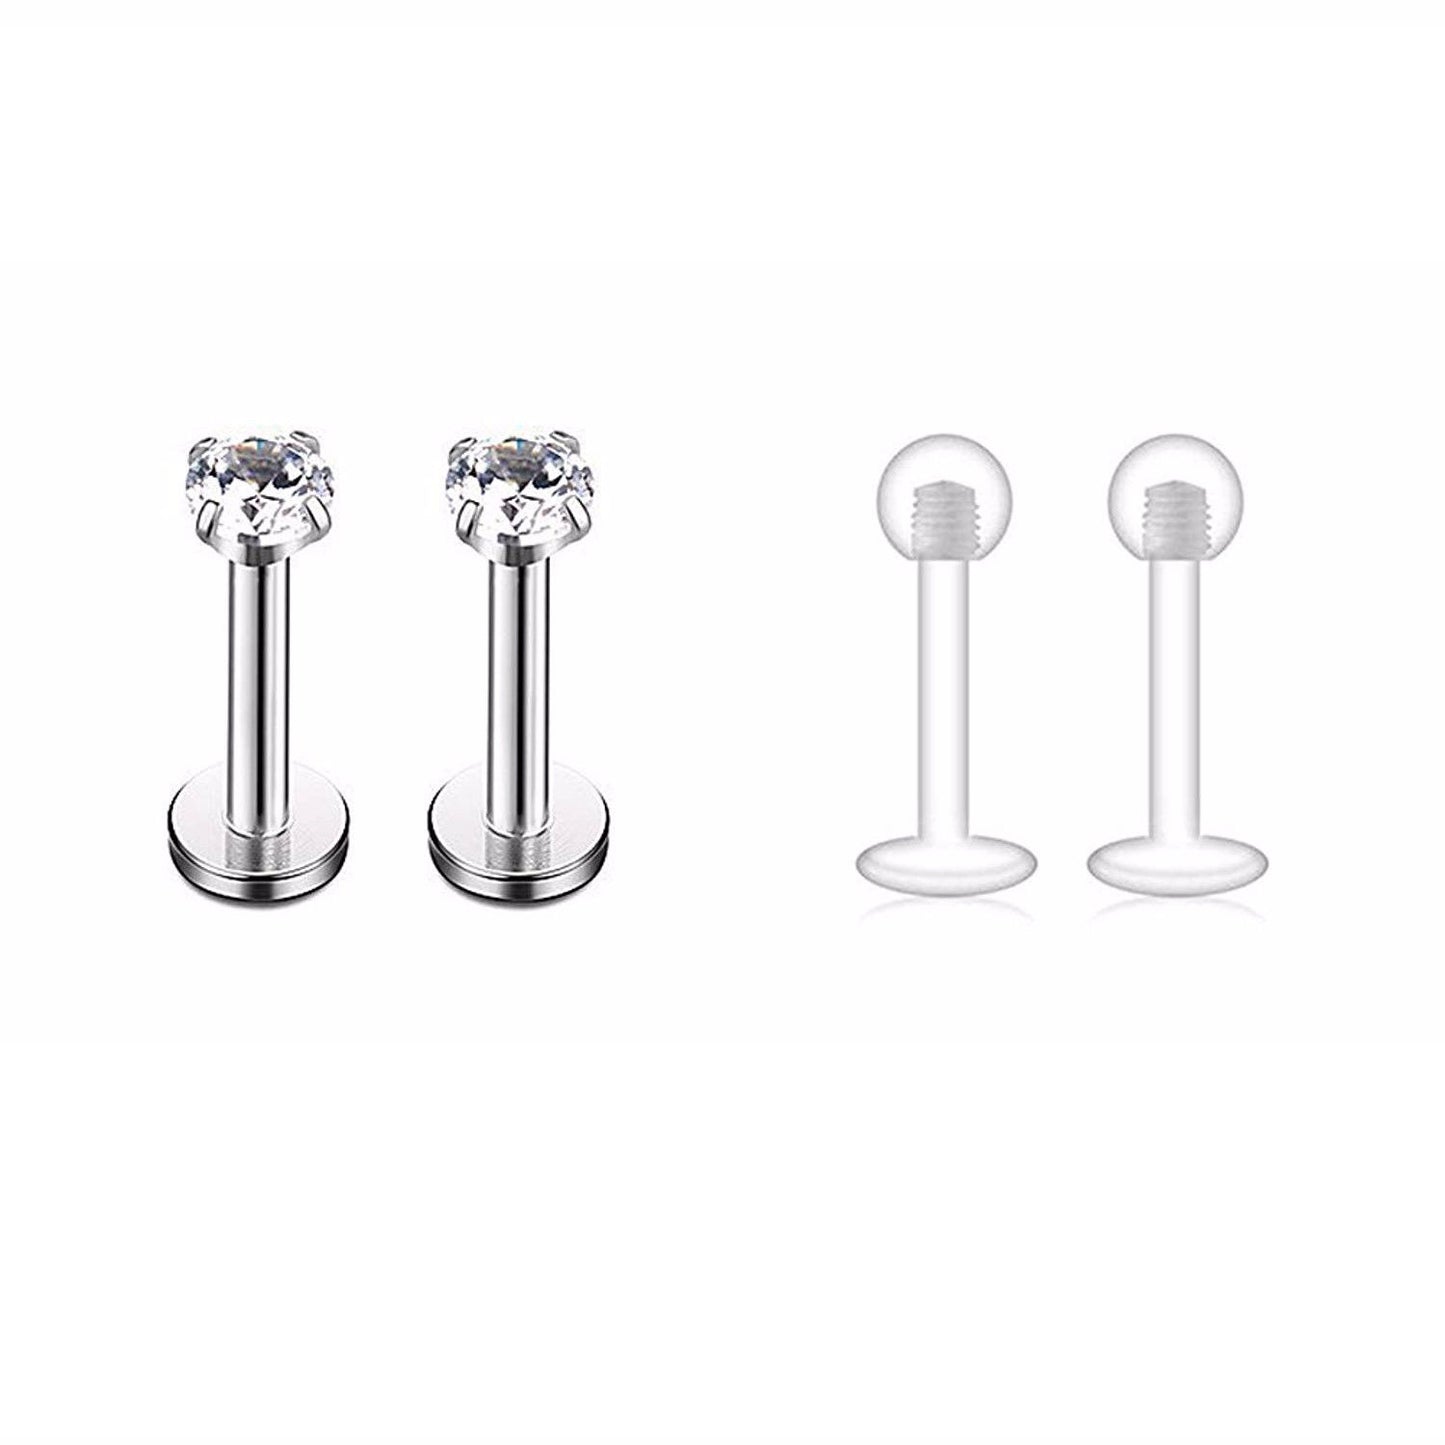 Labret Jewelry set of 4 Two with Jewel and Two Retainers 16g